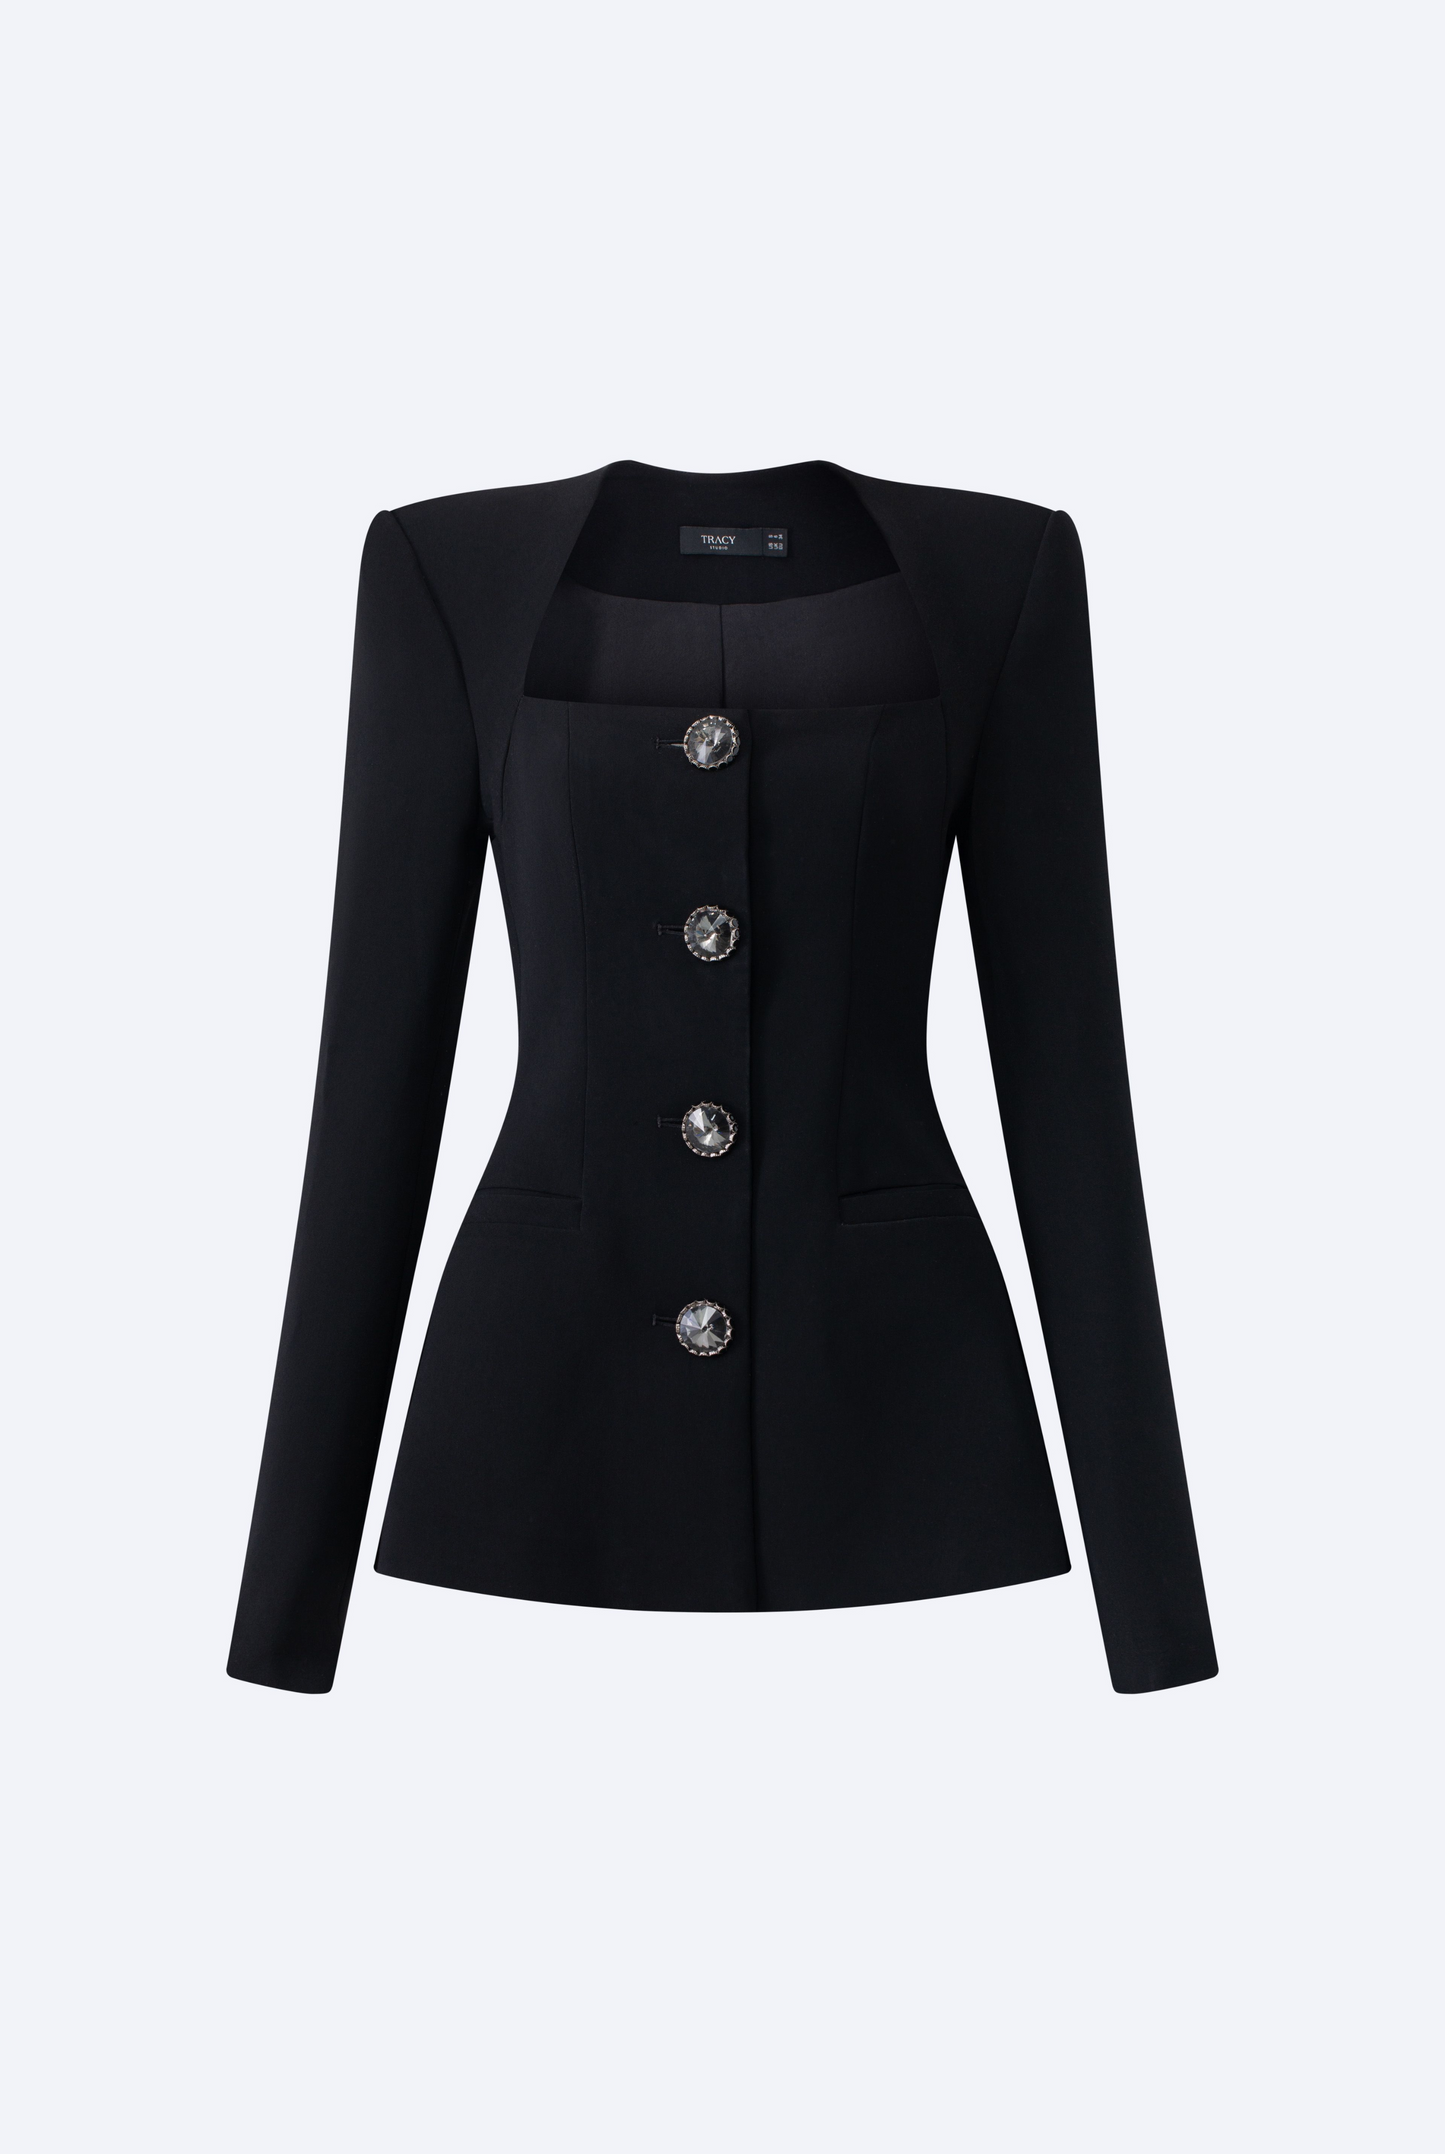 Long Sleeve Trapezoid Neckline Blazer and Flowing Skirt